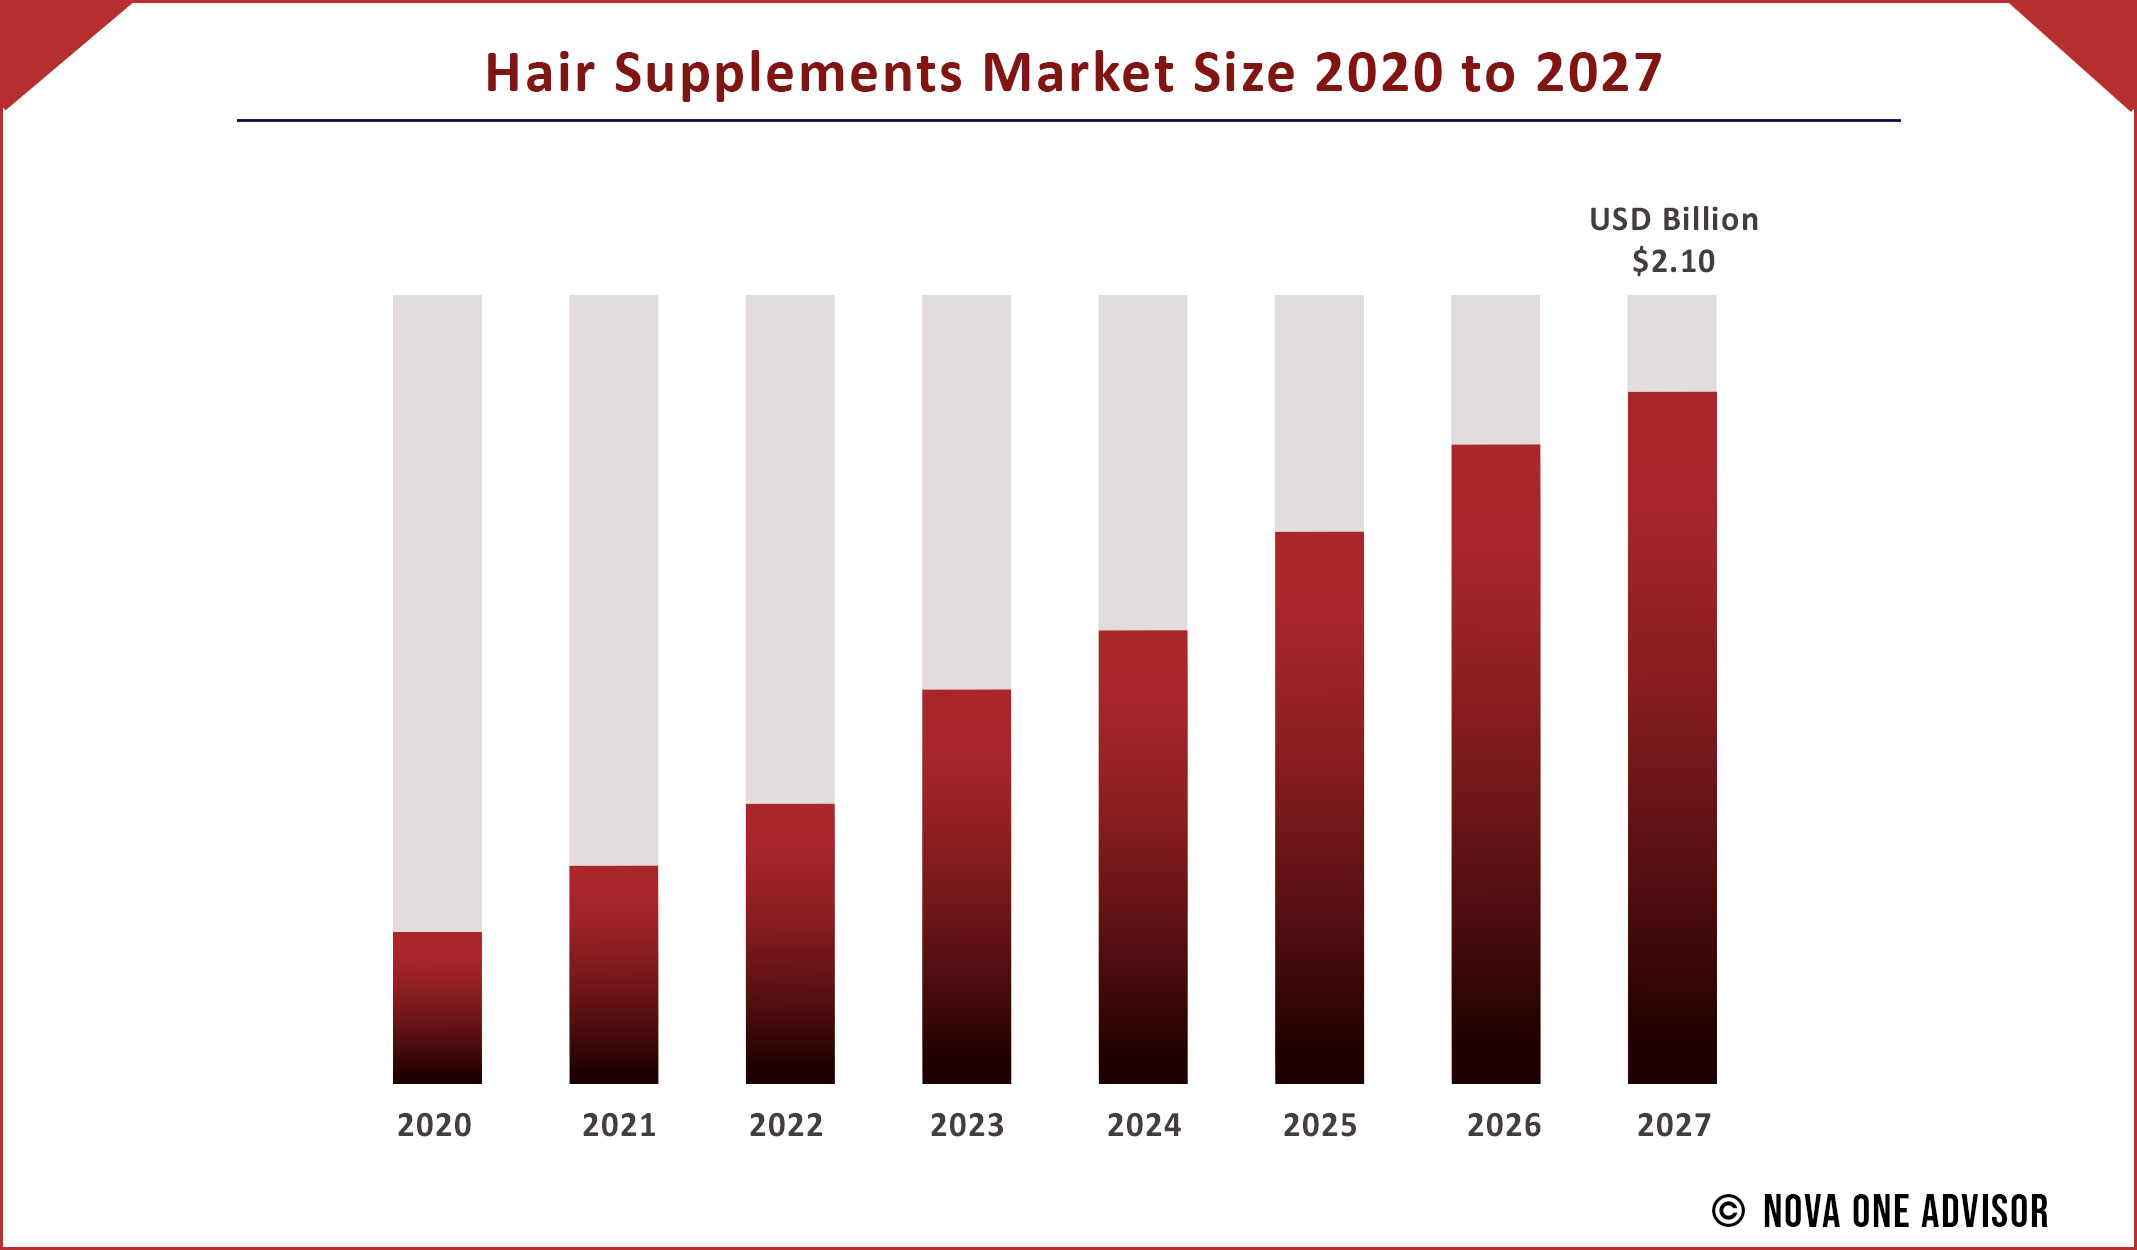 Hair Supplements Market Size 2020 to 2027